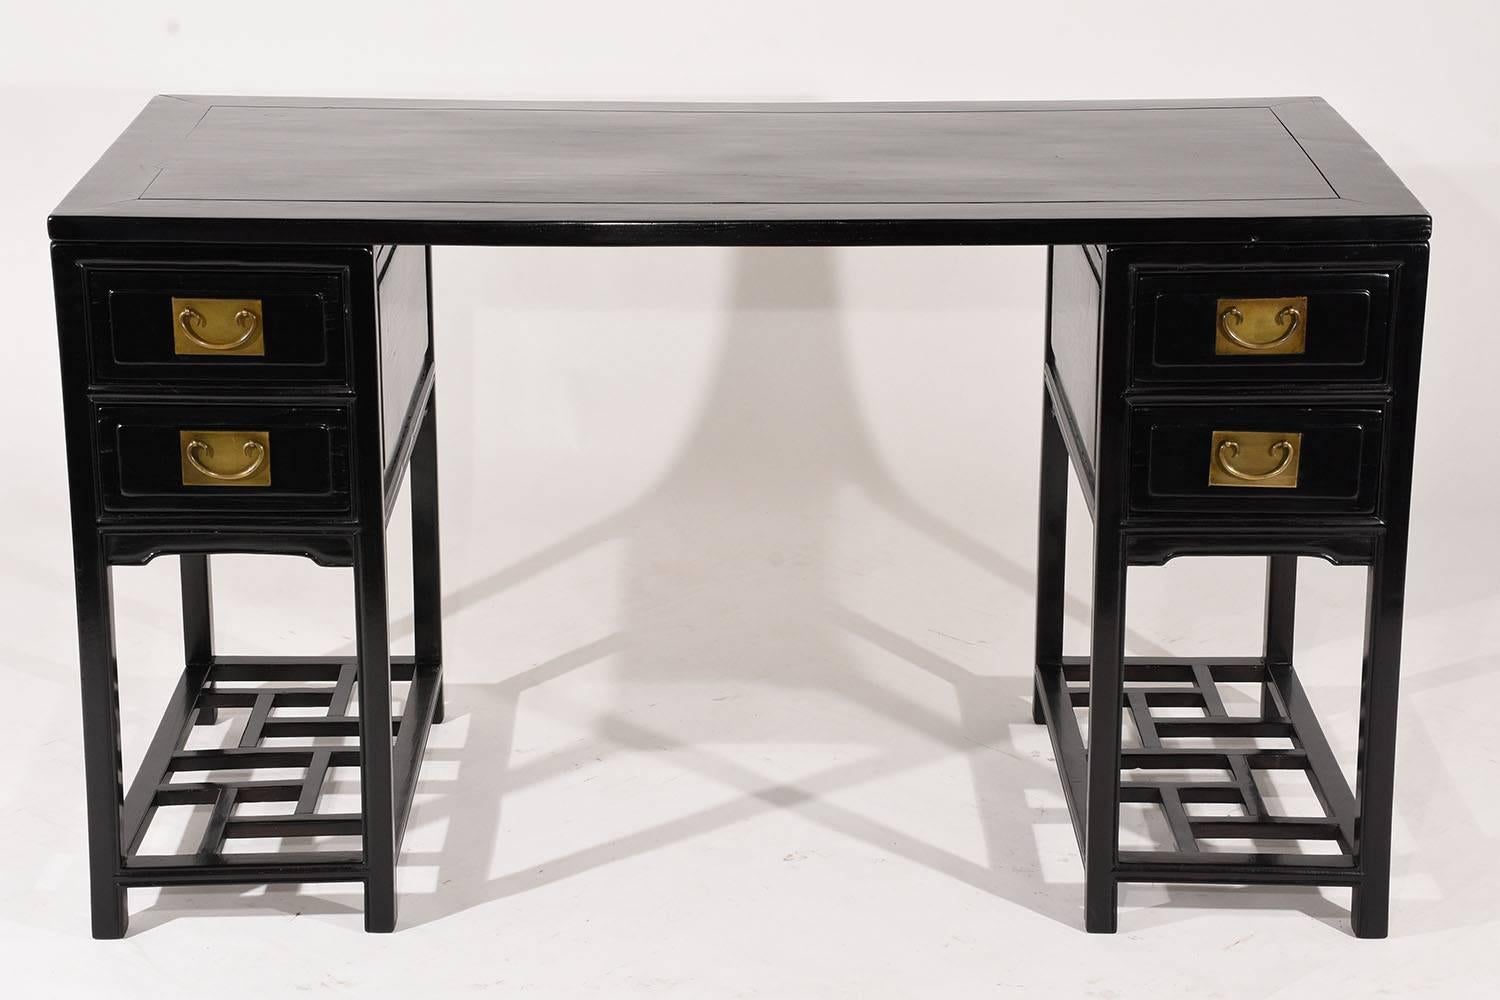 This 1970s vintage chinoiserie-style desk is made of wood that has been ebonized with a lacquered finish. The pedestal legs have two drawers each adorned with large brass drawer pulls and an open shelf below with a geometric design. The desk top has